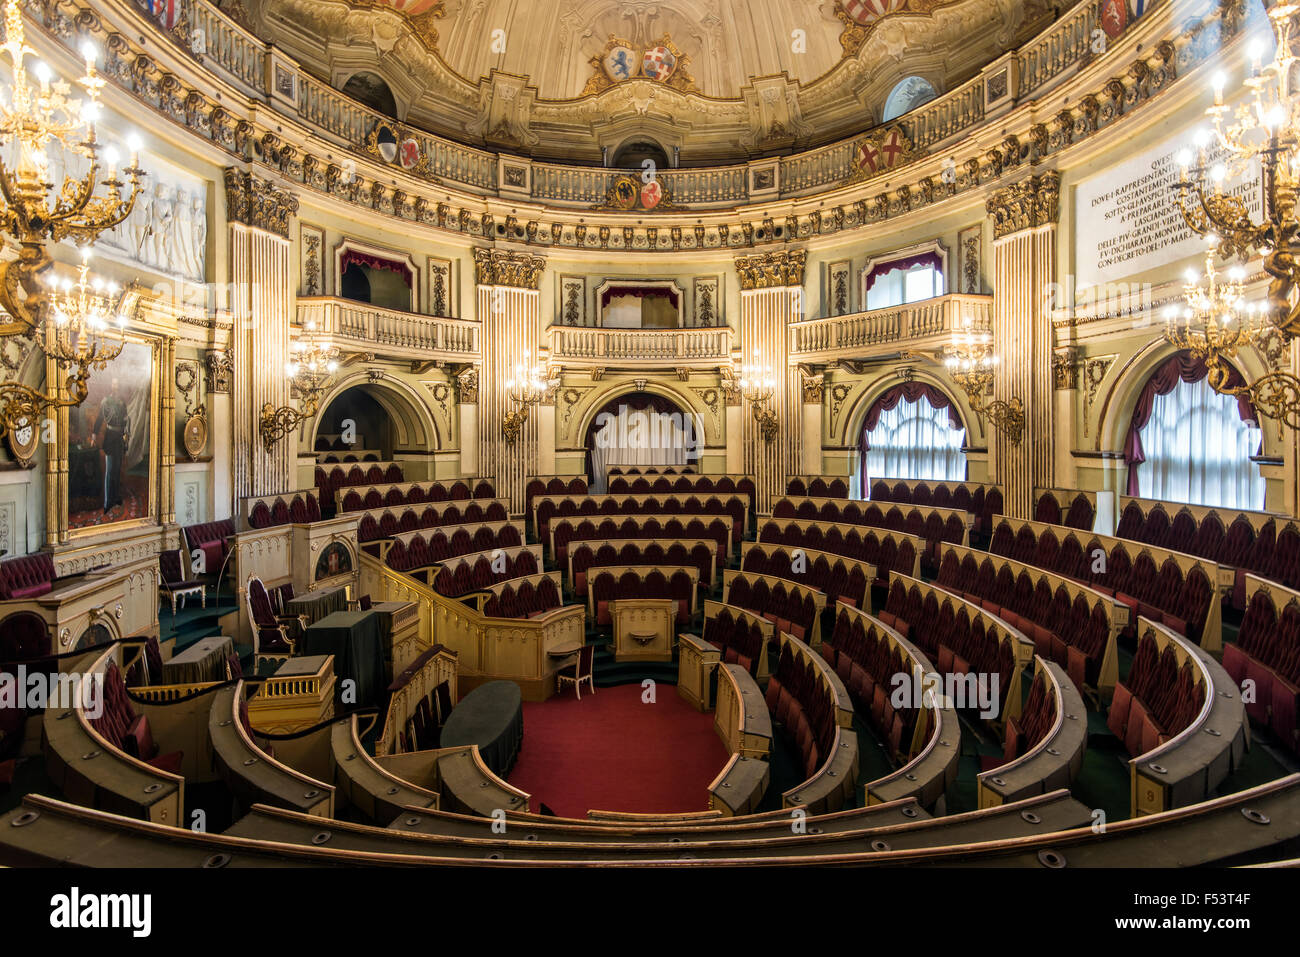 View of the Parliament of the newly unified Kingdom of Italy created in 1861 inside Palazzo Carignano, Turin, Piedmont, Italy Stock Photo